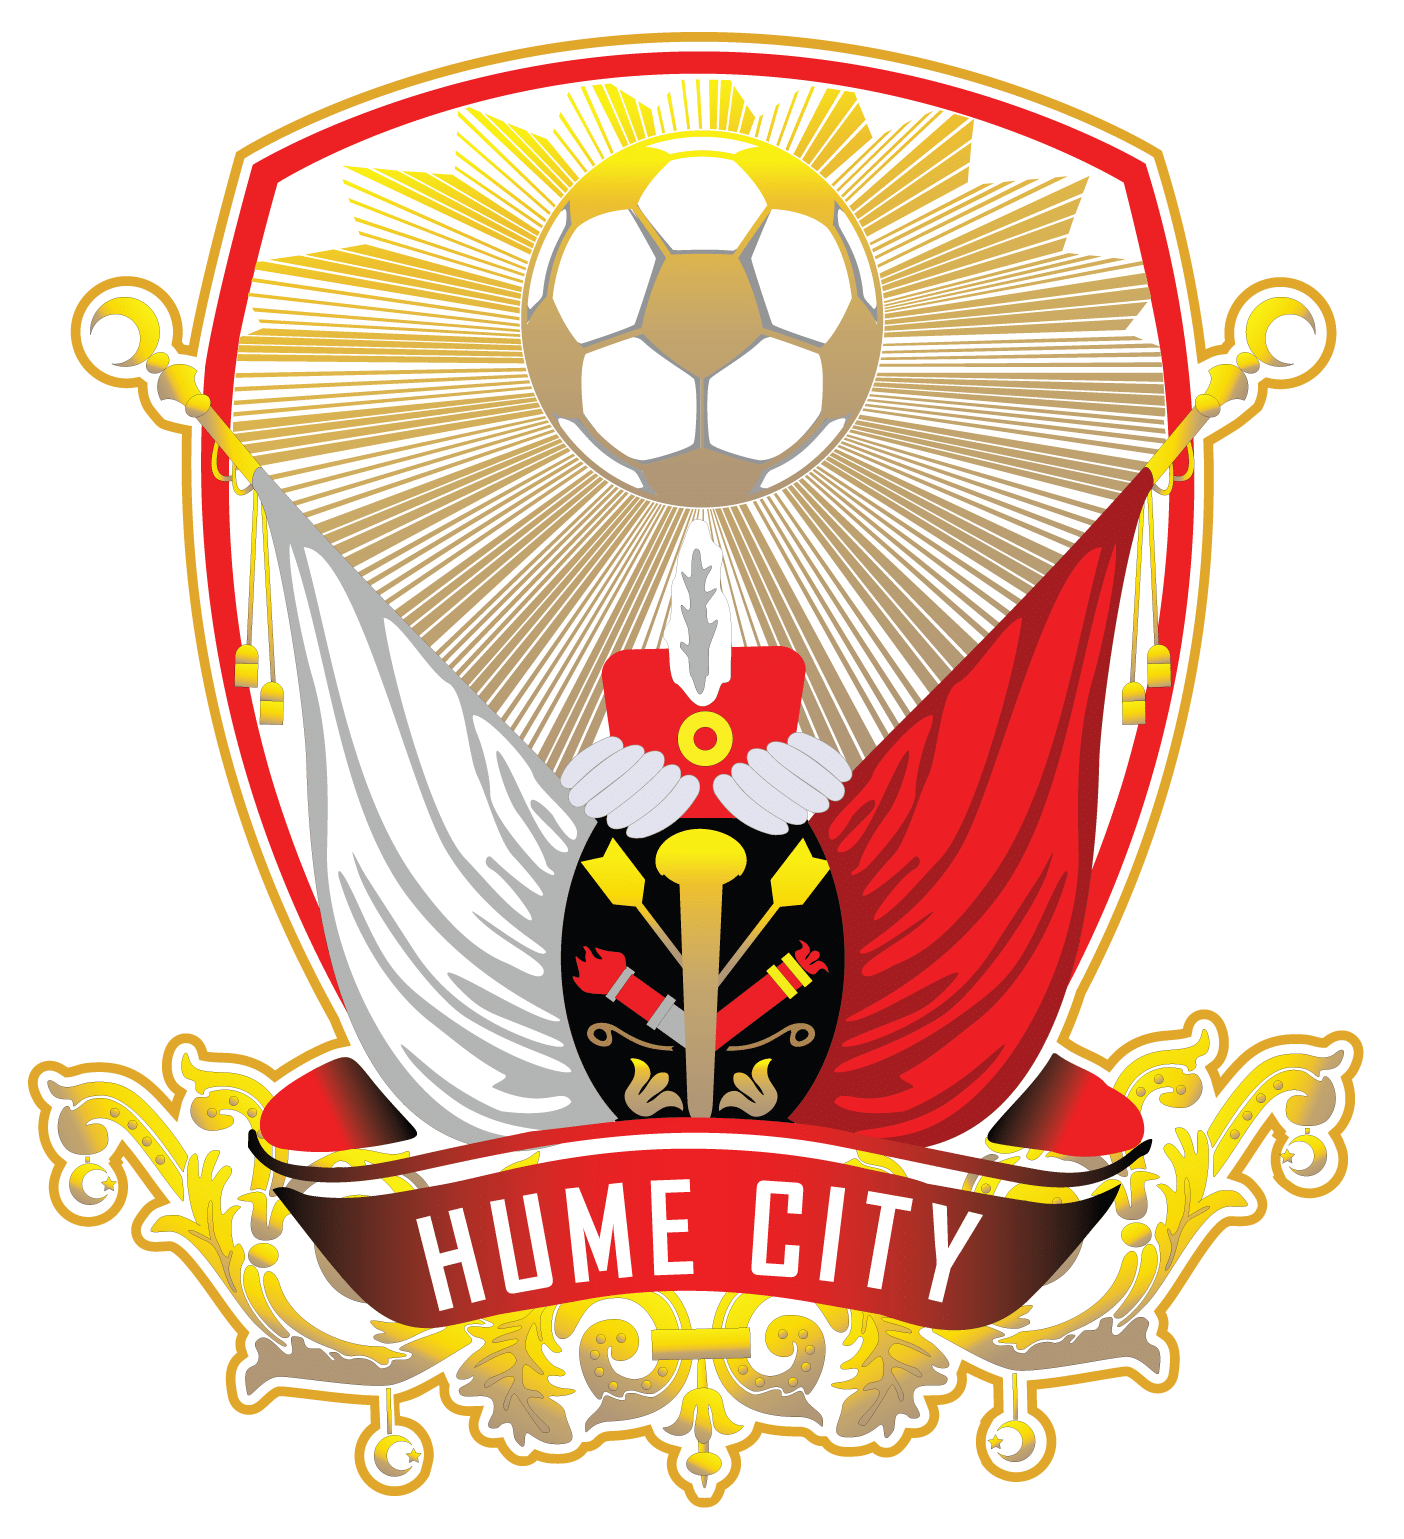 Hume City FC - Bentleigh Green Soccer Club